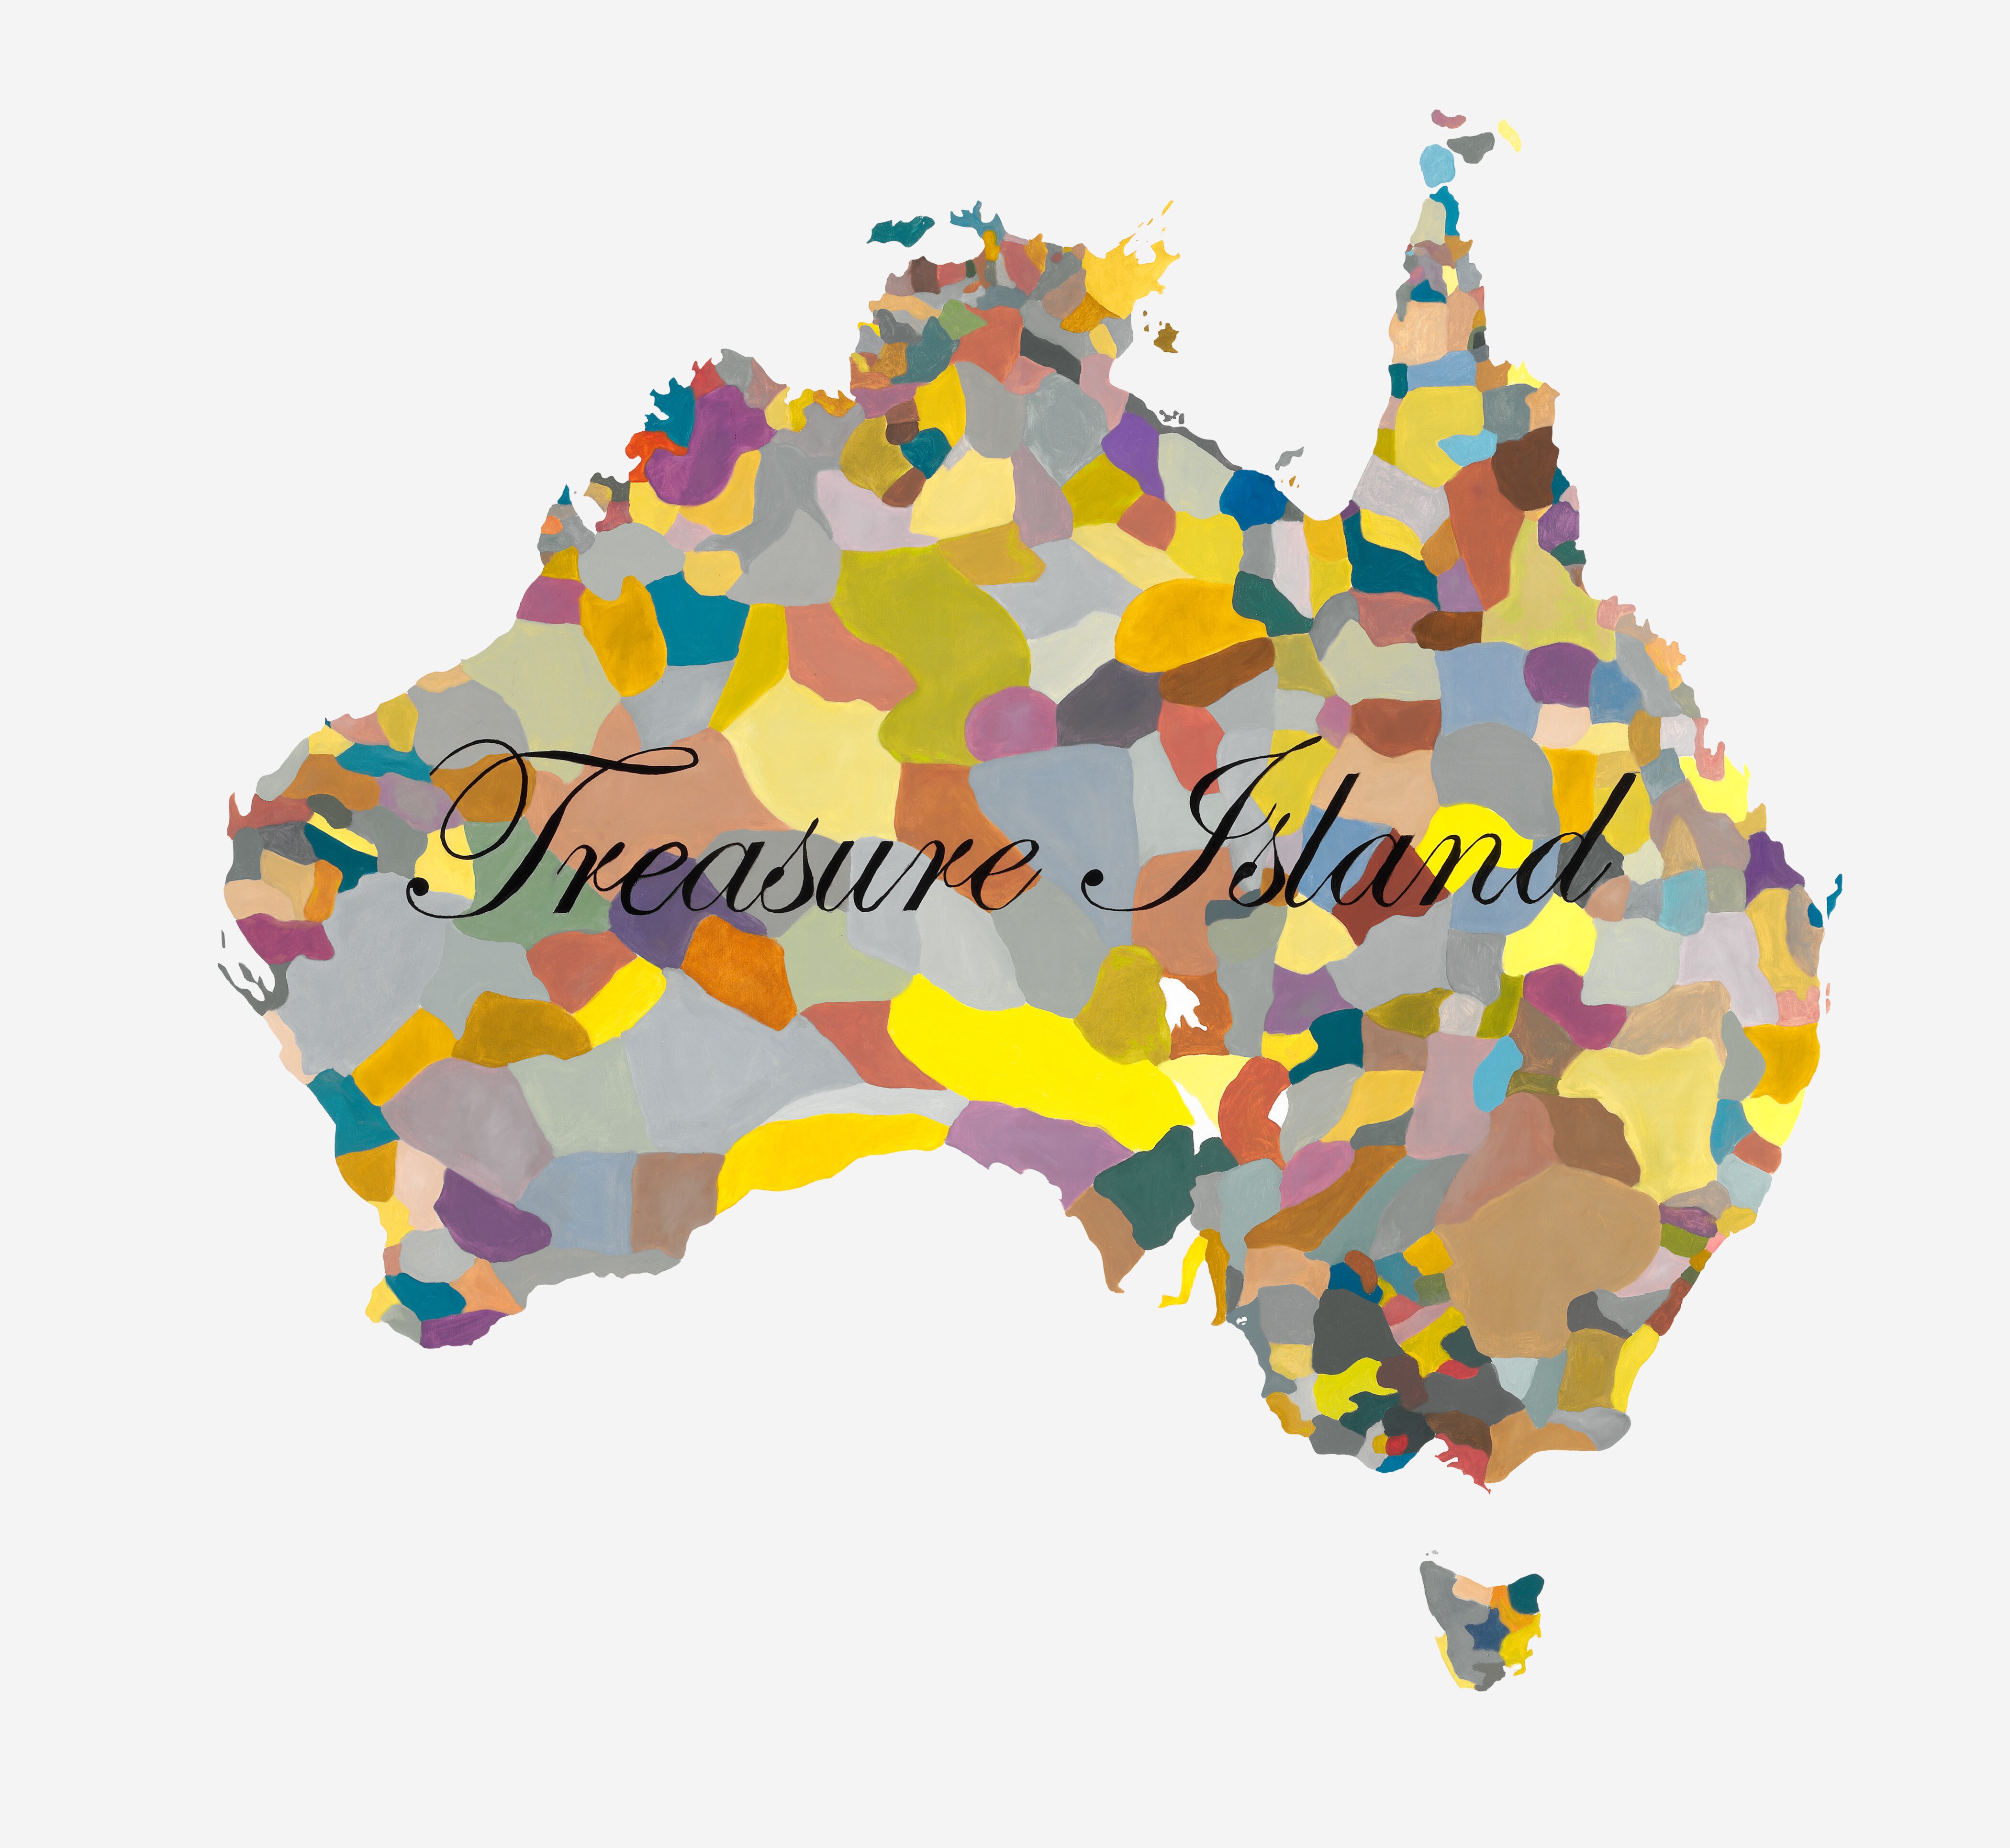 Colourful map of Australia with different demarcations, with the text "Treasure Island" in cursive font.